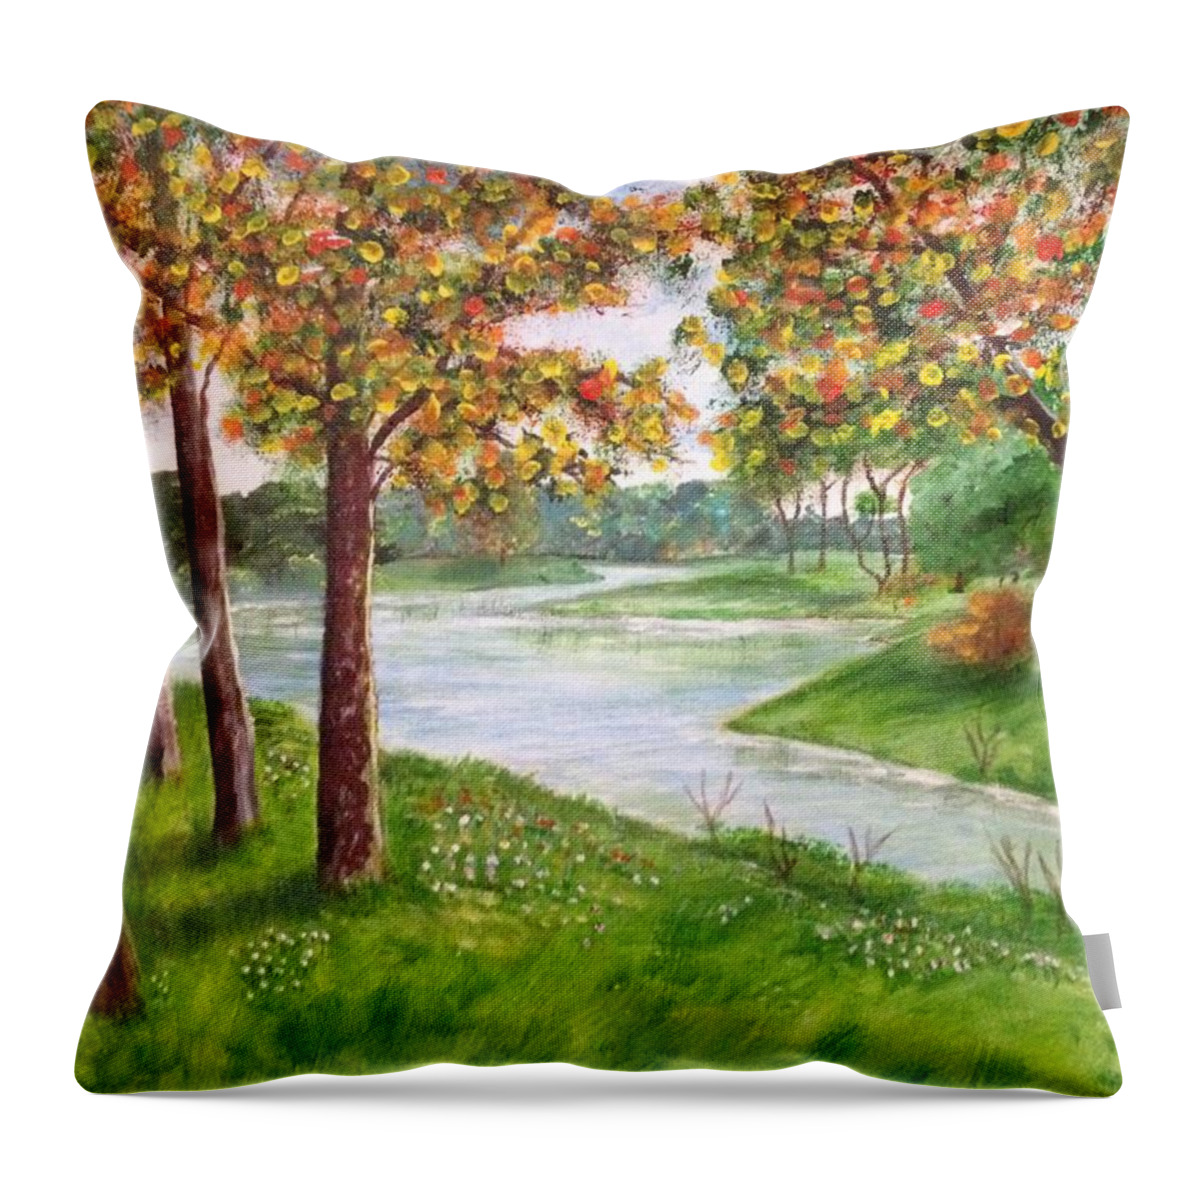 Autumn Throw Pillow featuring the painting Autumn River by Ronnie Egerton